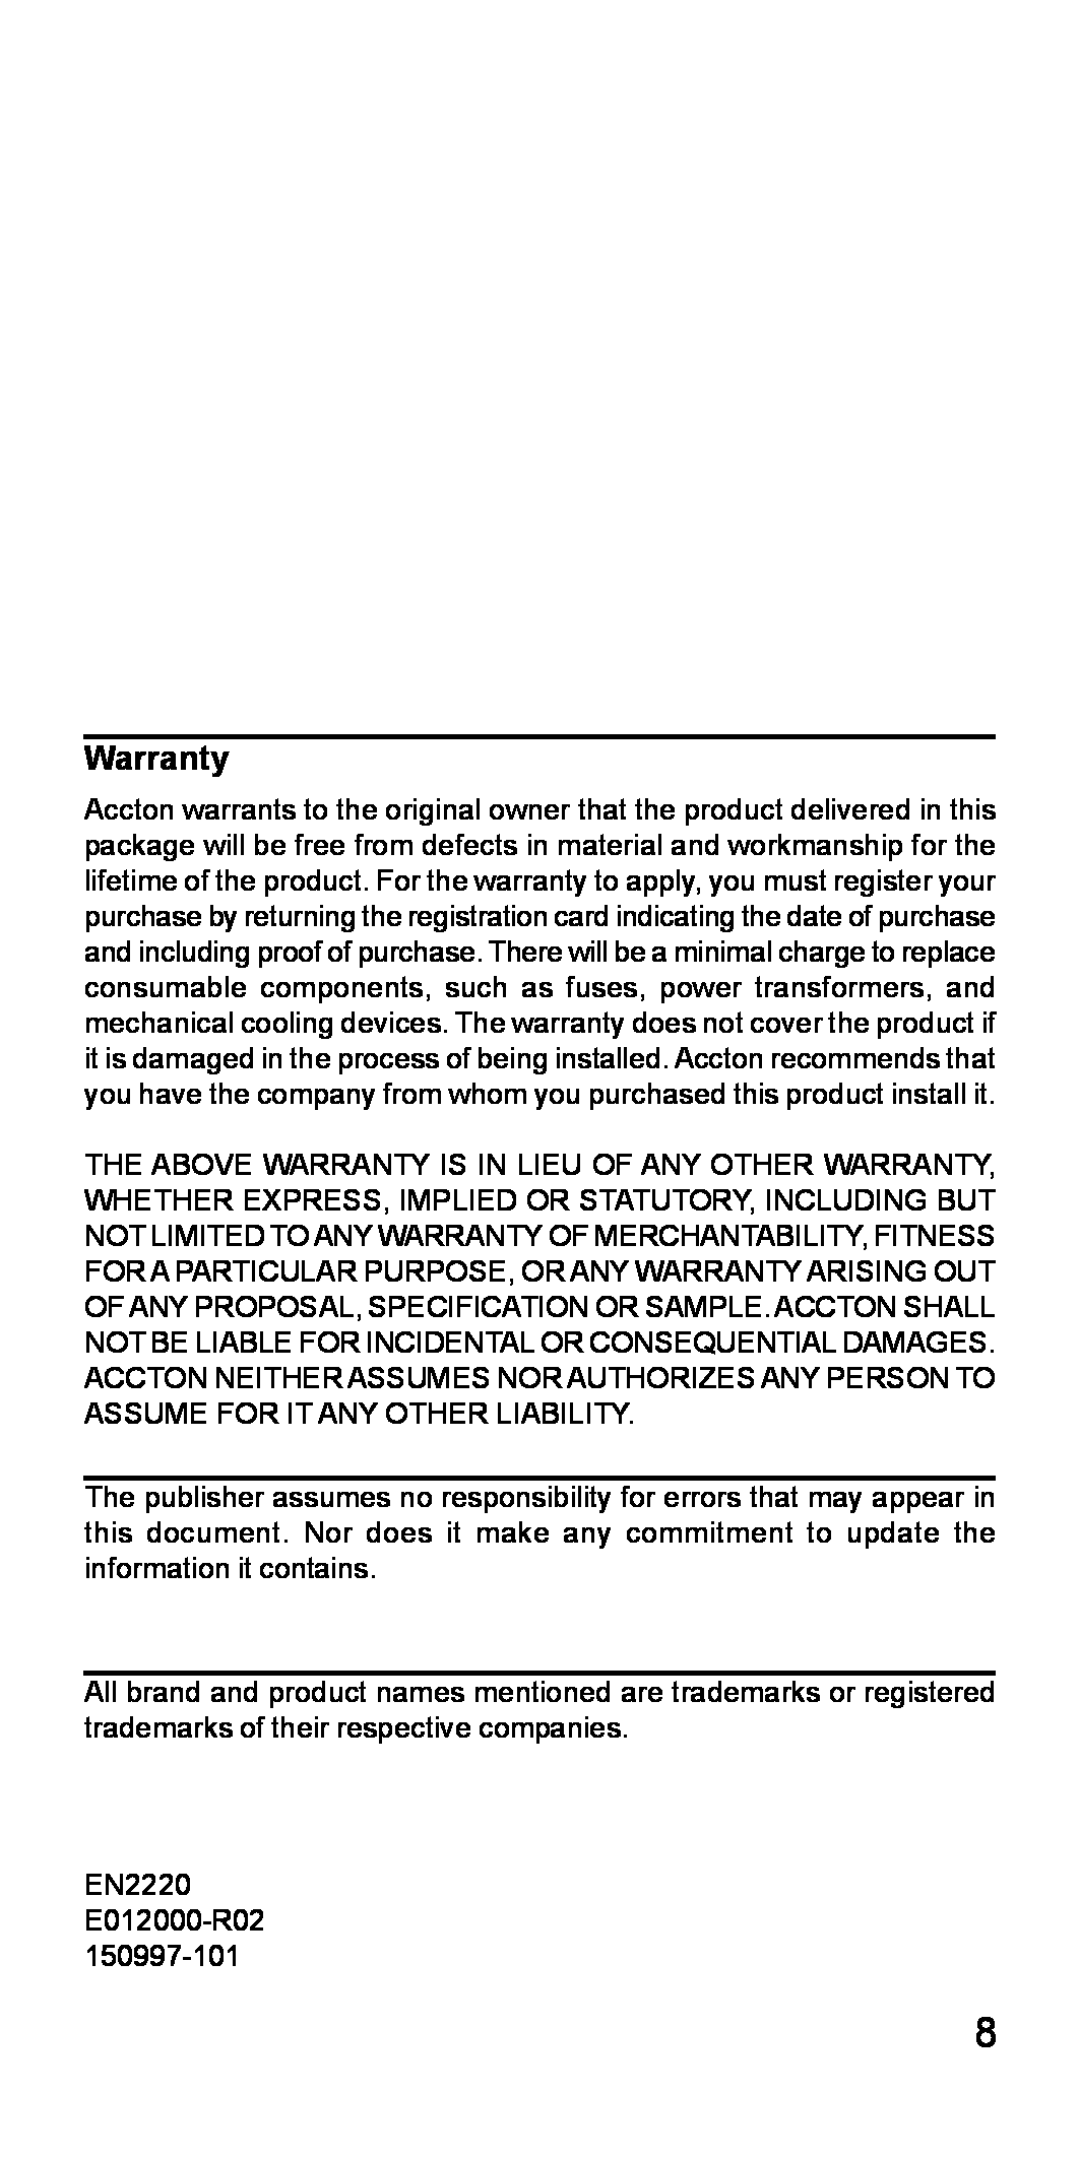 Accton Technology 32 specifications Warranty 